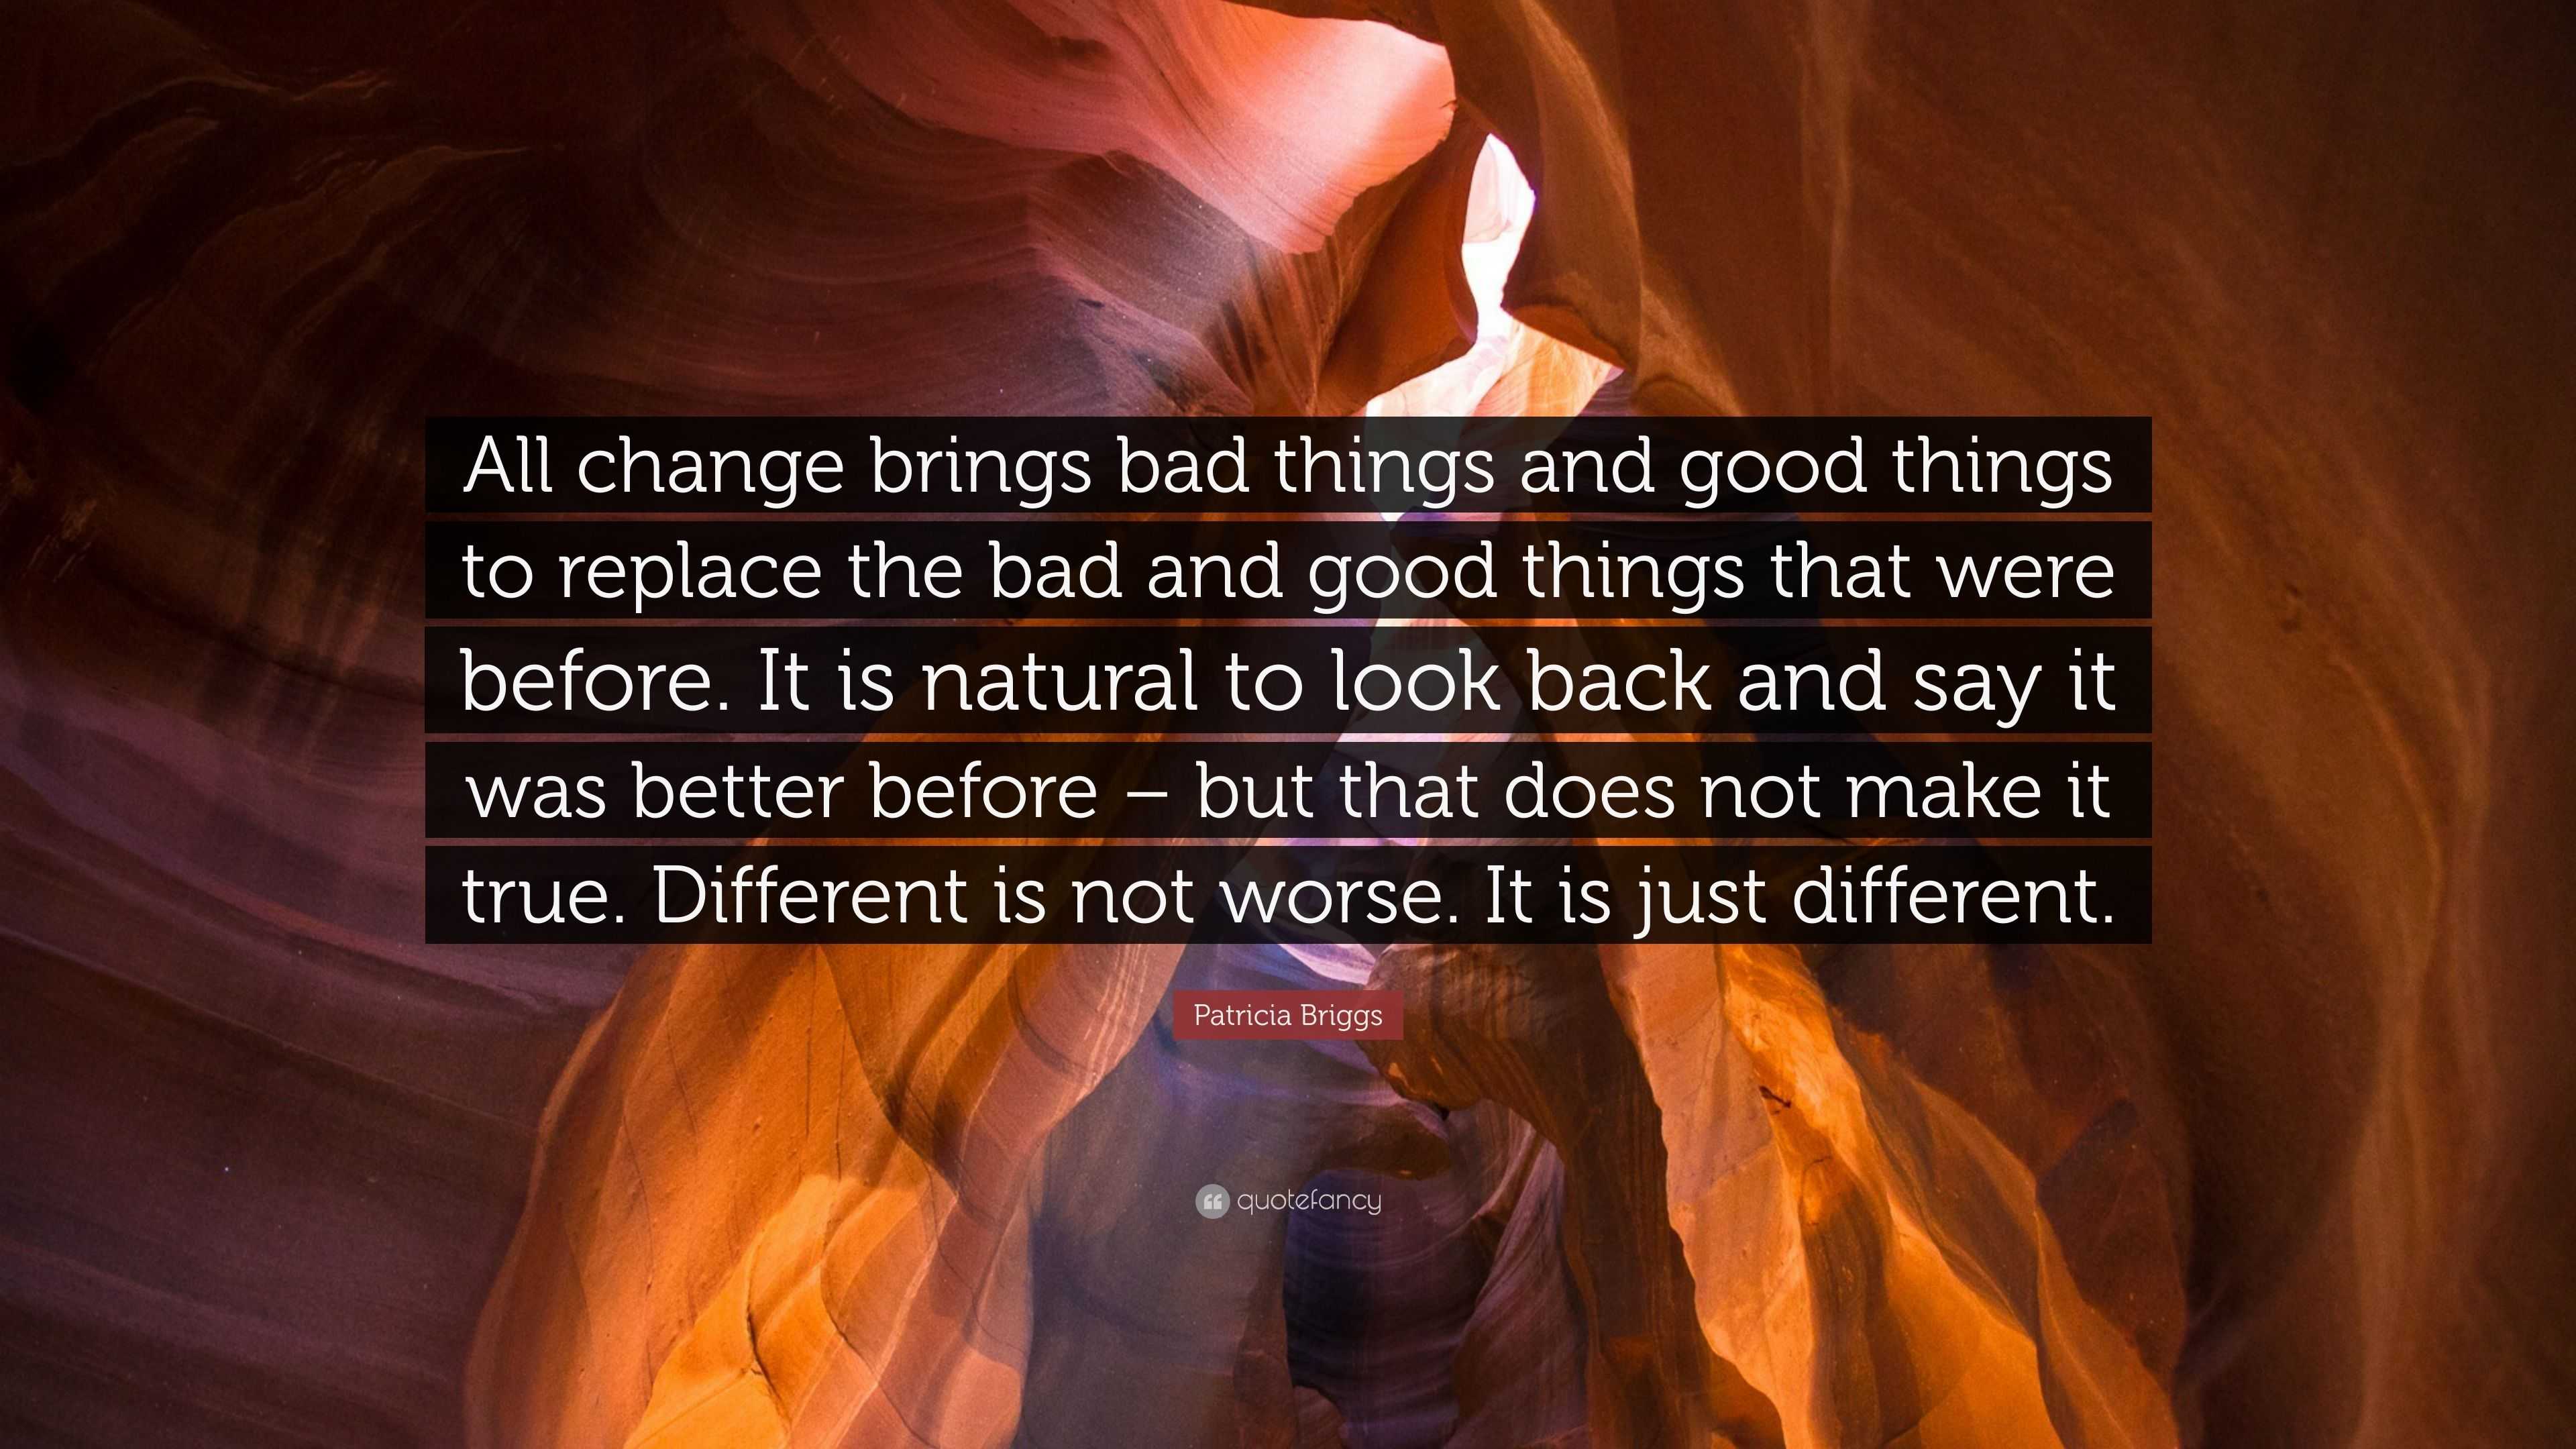 Patricia Briggs Quote: “All change brings bad things and good things to ...